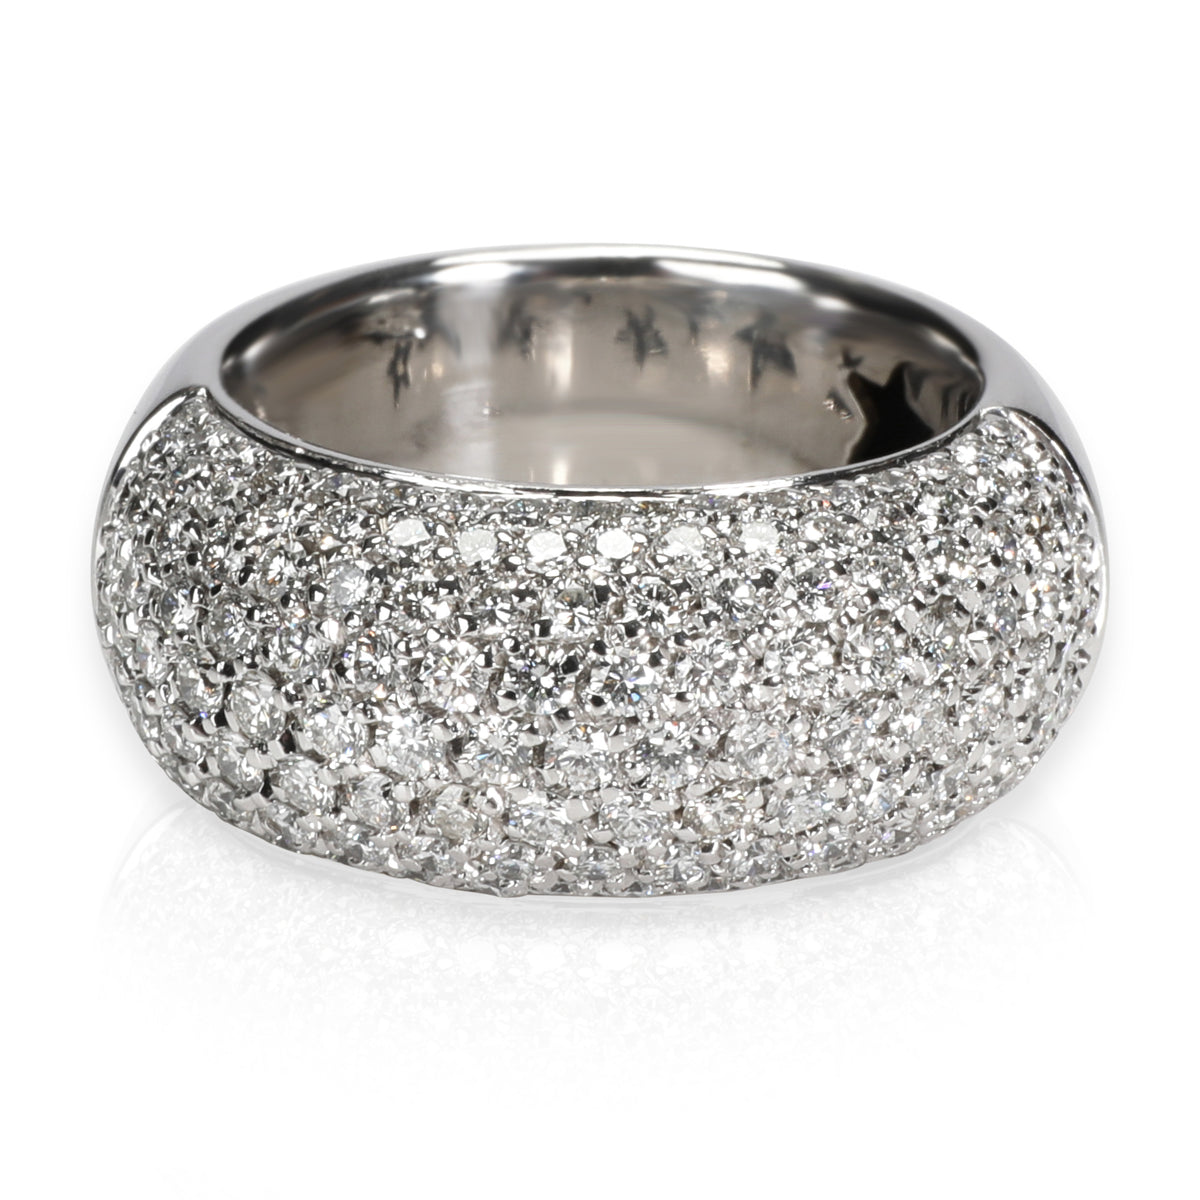 H. Stern Wide Pave Diamond Ring in 18K White Gold 1.89 CTW